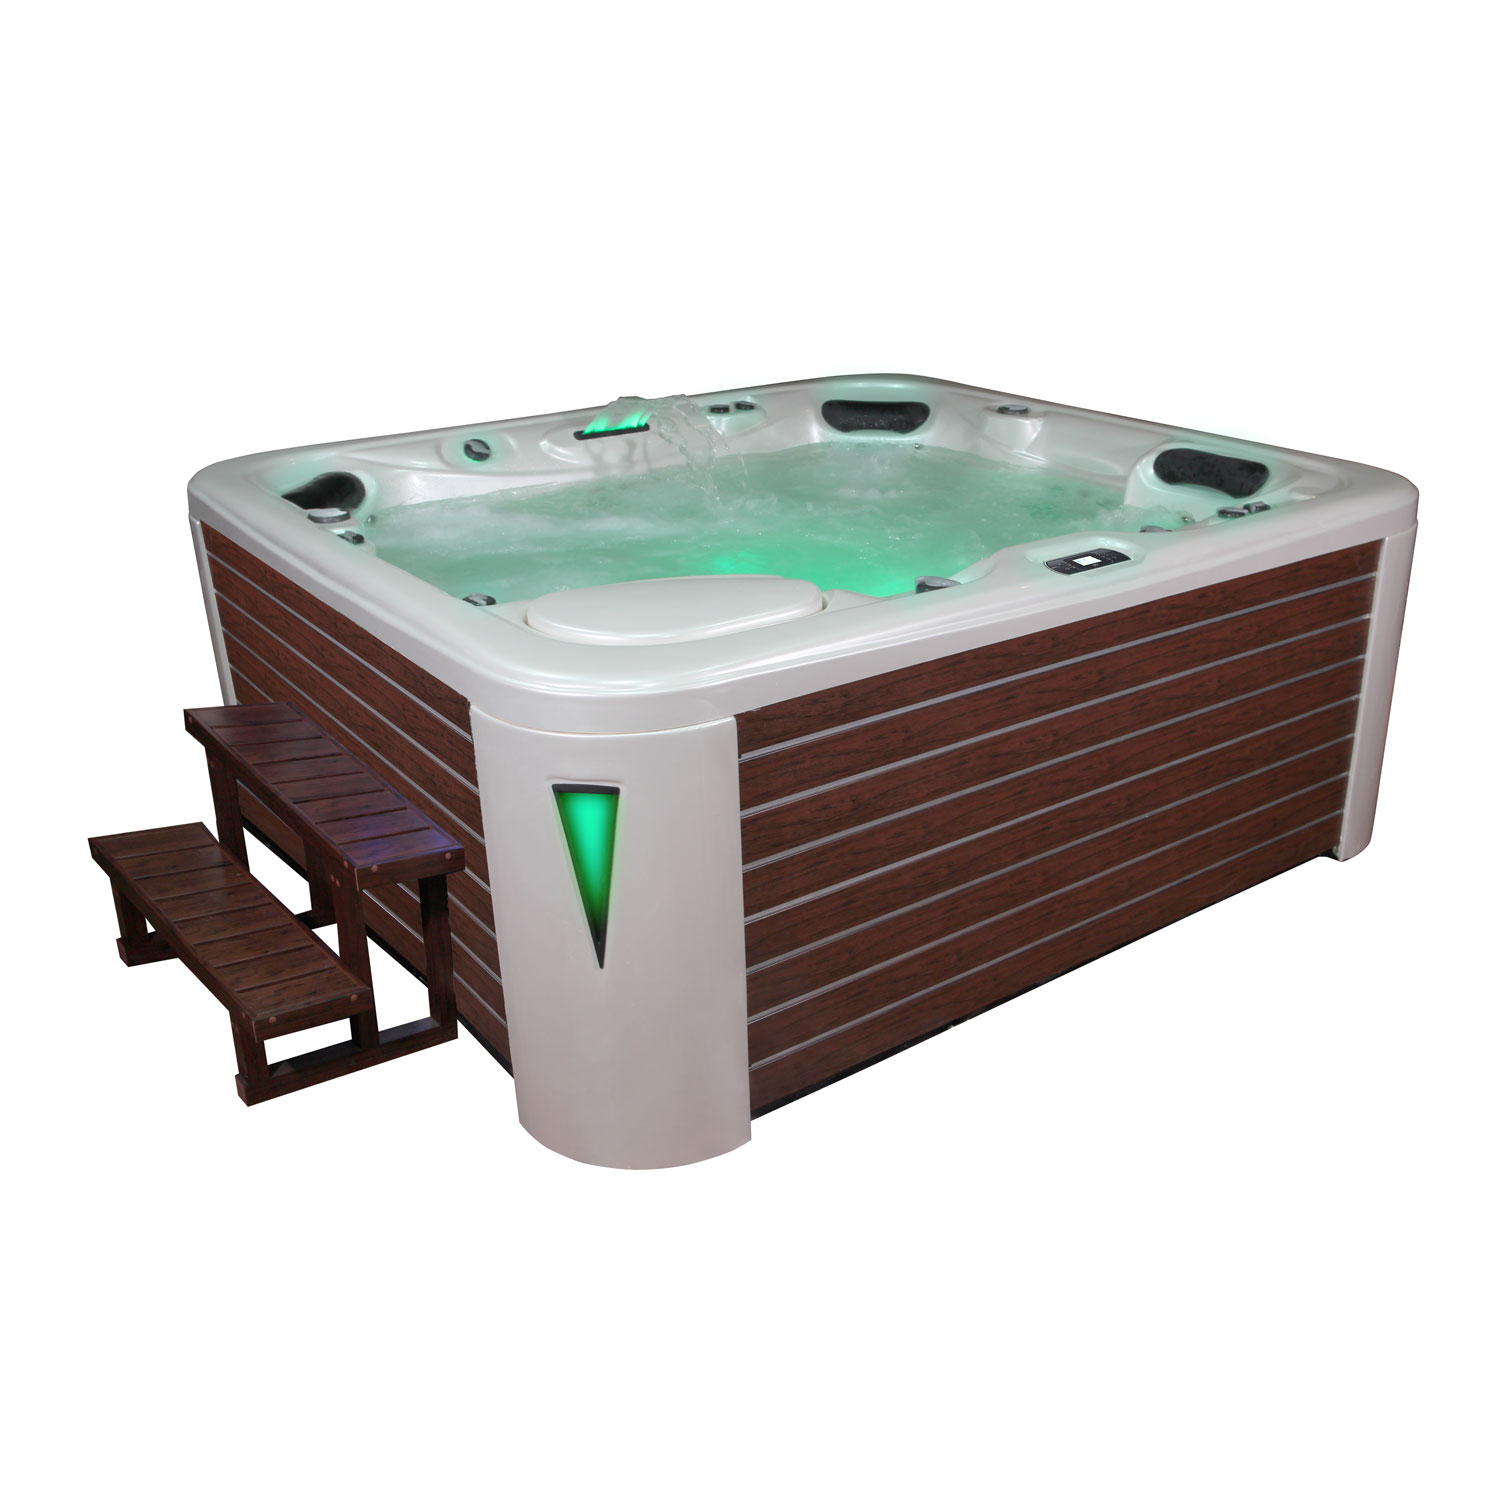 AWT SPA IN-590 premium extreme ,WhitePearlescent,250x228, brown